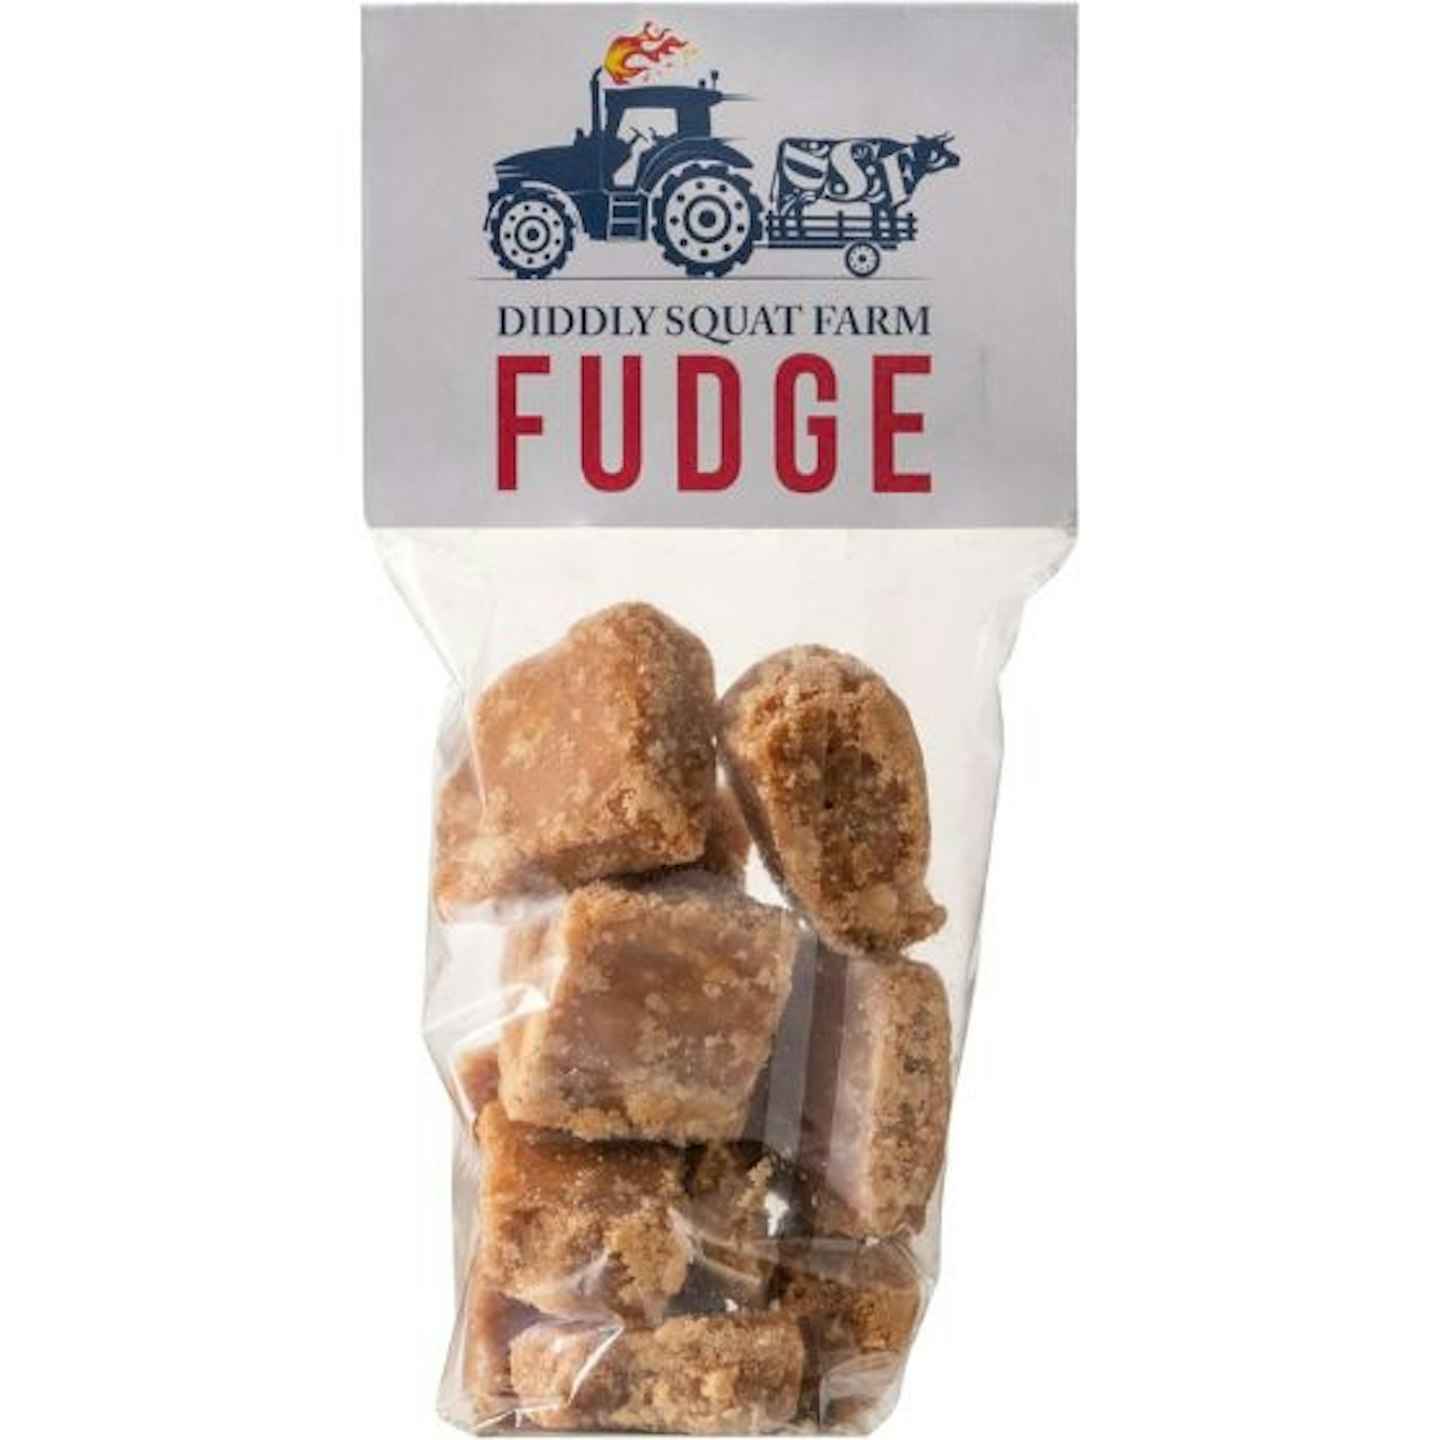 Diddly Squat Cotswold Fudge from Clarksons's farm